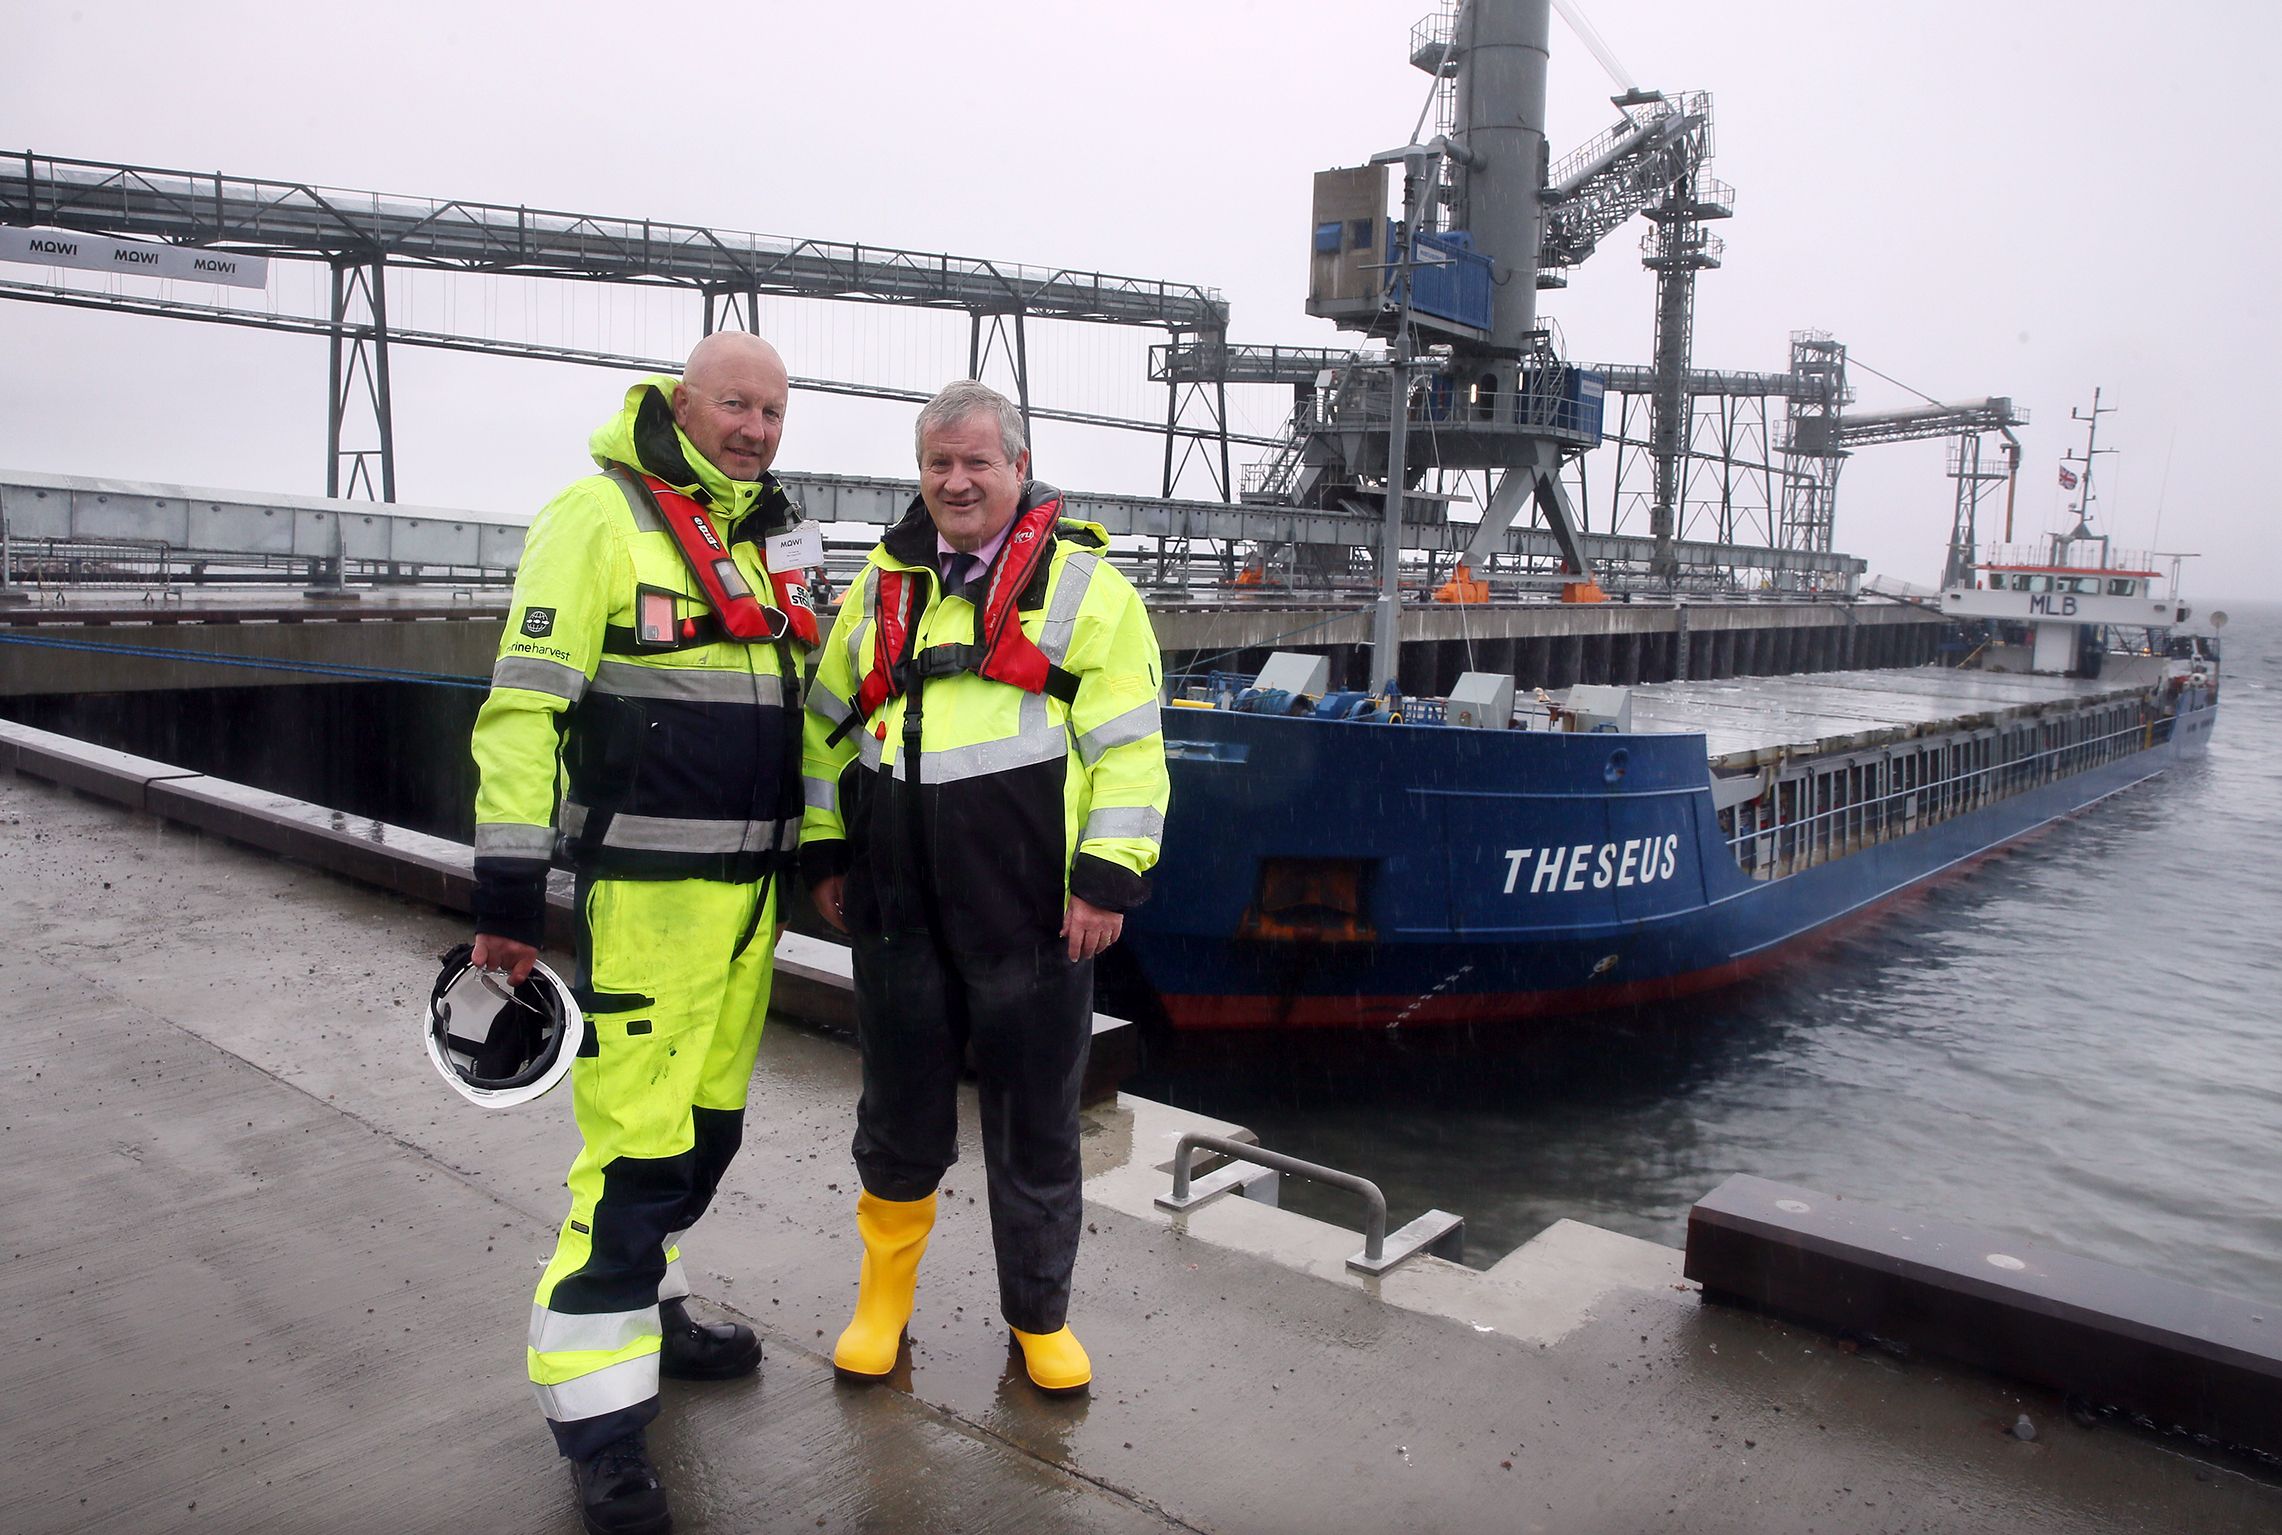 Mowi's Mick Watts (left) with Ian Blackford at the Kyleakin pier 